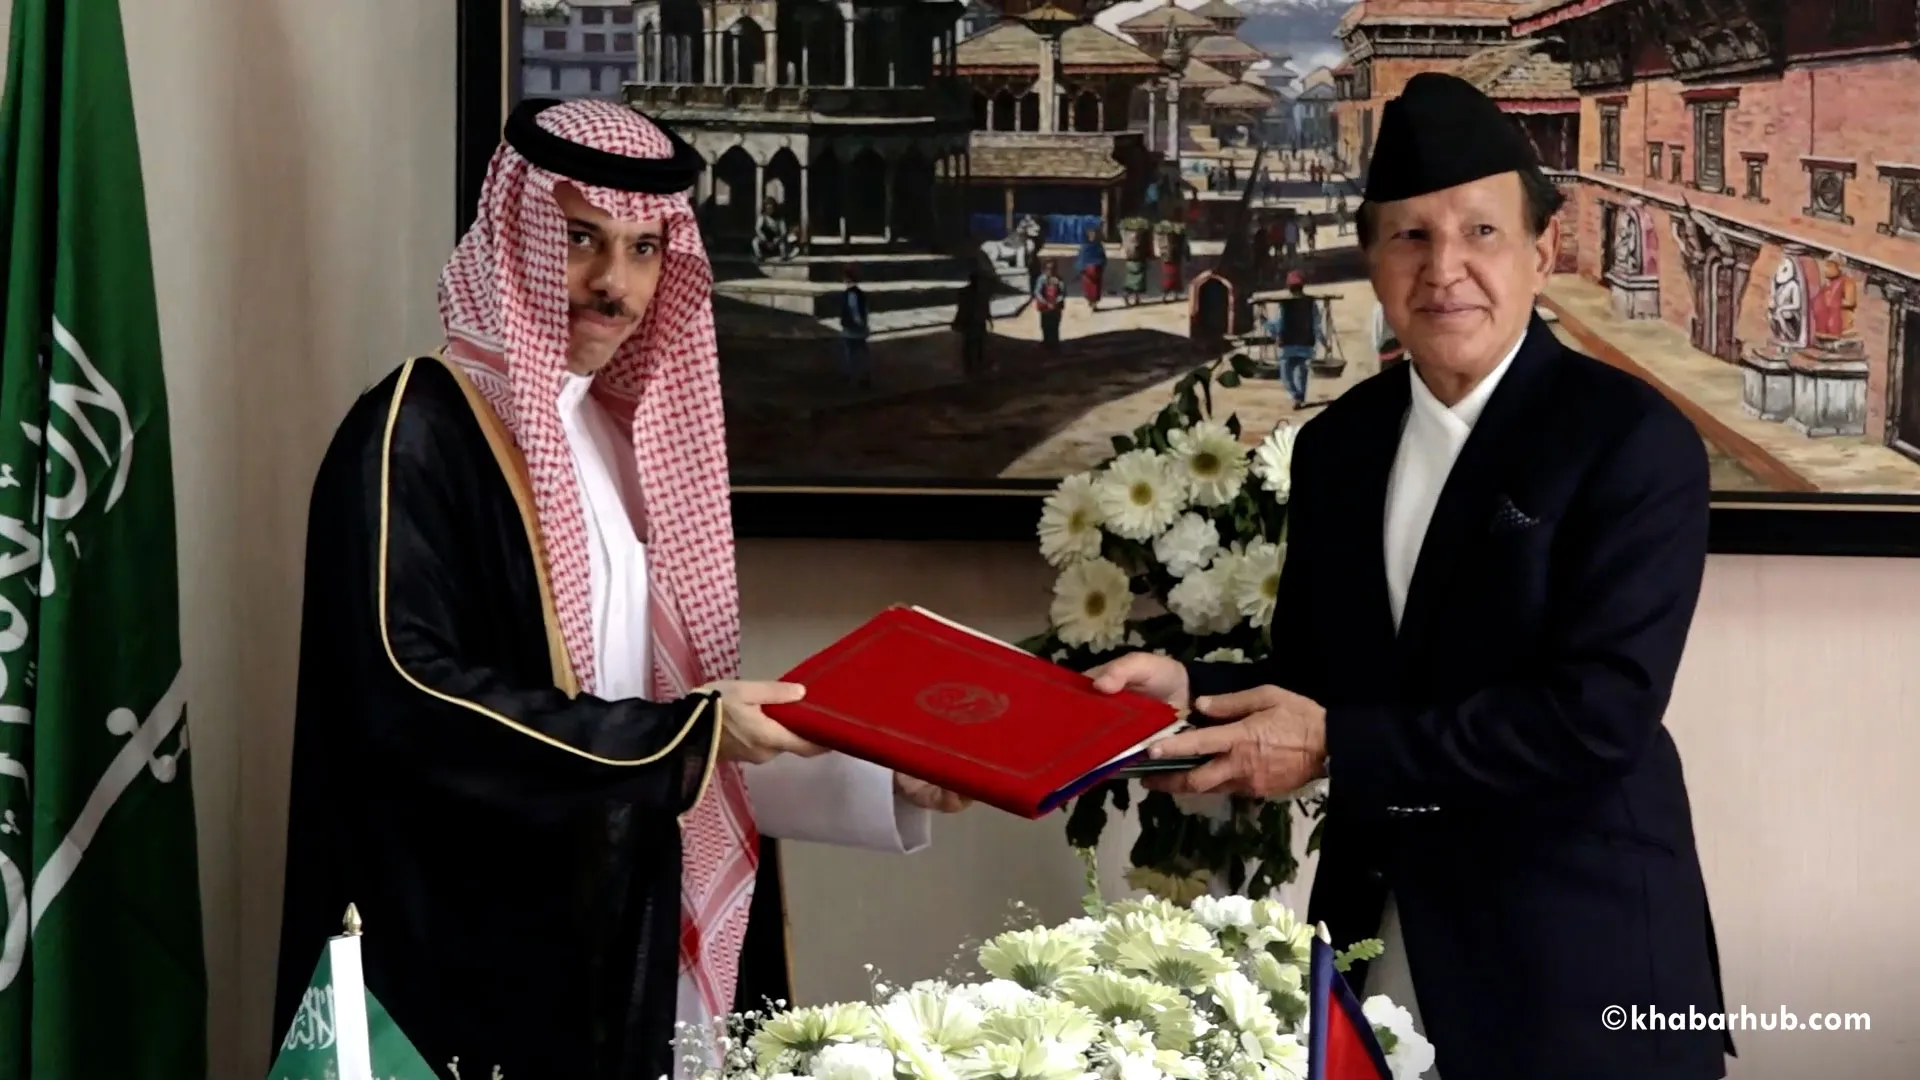 Nepal and Saudi Arabia sign an agreement to enhance mutual cooperation